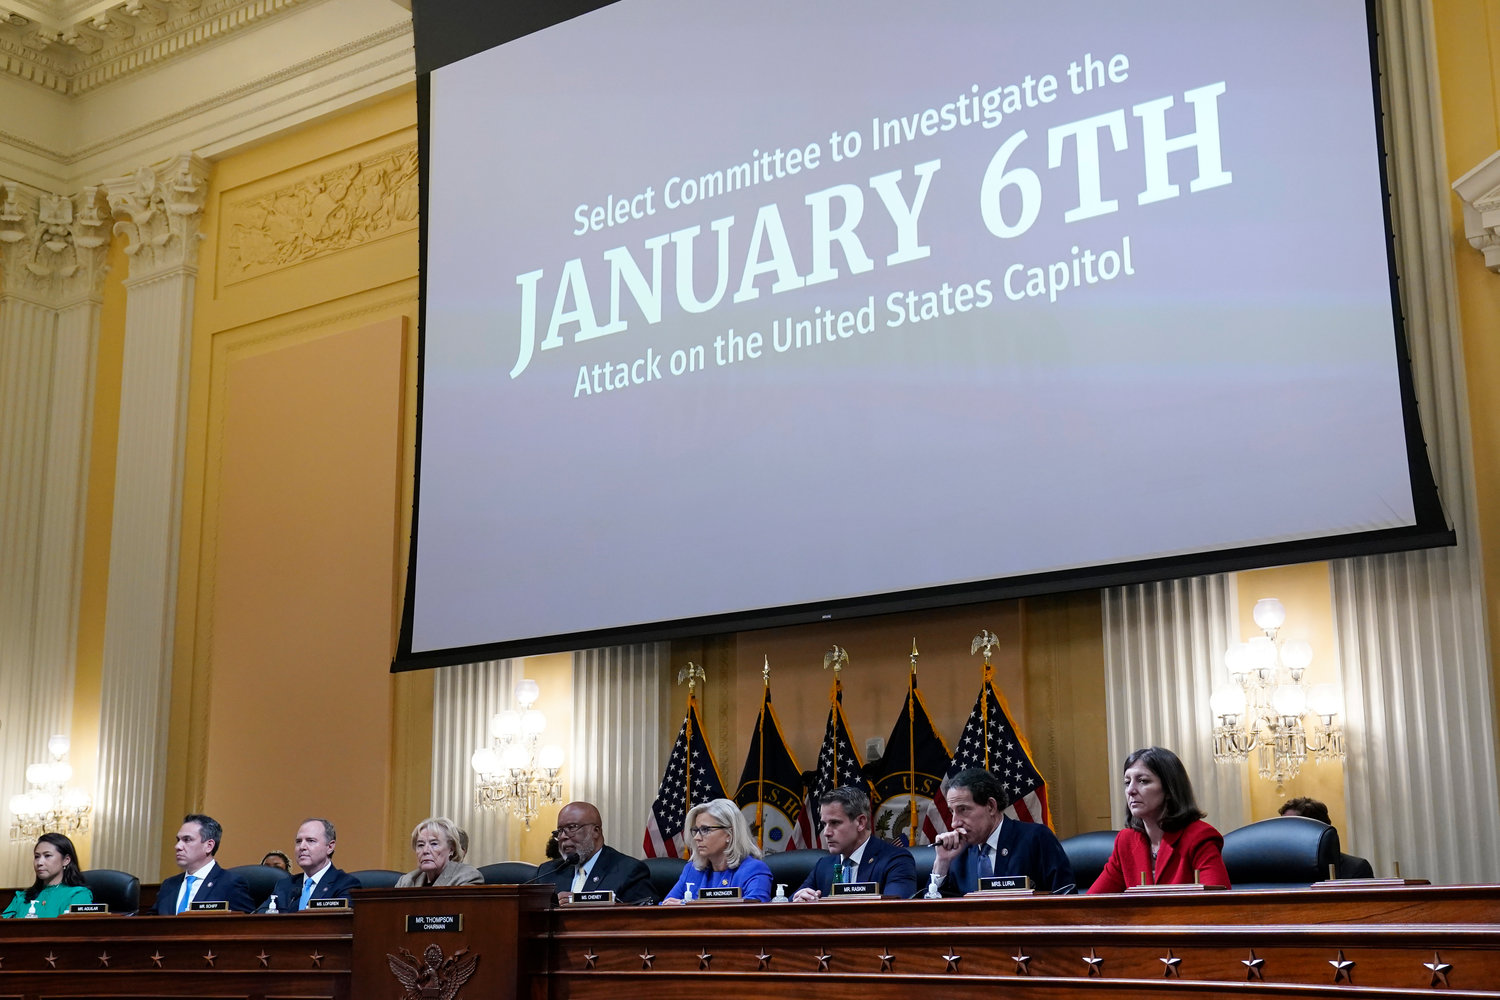 From left to right, Rep. Stephanie Murphy, D-Fla., Rep. Pete Aguilar, D-Calif., Rep. Adam Schiff, D-Calif., Rep. Zoe Lofgren, D-Calif., Chairman Bennie Thompson, D-Miss., Vice Chair Liz Cheney, R-Wyo., Rep. Adam Kinzinger, R-Ill., Rep. Jamie Raskin, D-Md., and Rep. Elaine Luria, D-Va., are seated as the House select committee investigating the Jan. 6 attack on the U.S. Capitol holds its first public hearing to reveal the findings of a year-long investigation, at the Capitol in Washington, Thursday, June 9, 2022. (AP Photo/J. Scott Applewhite)